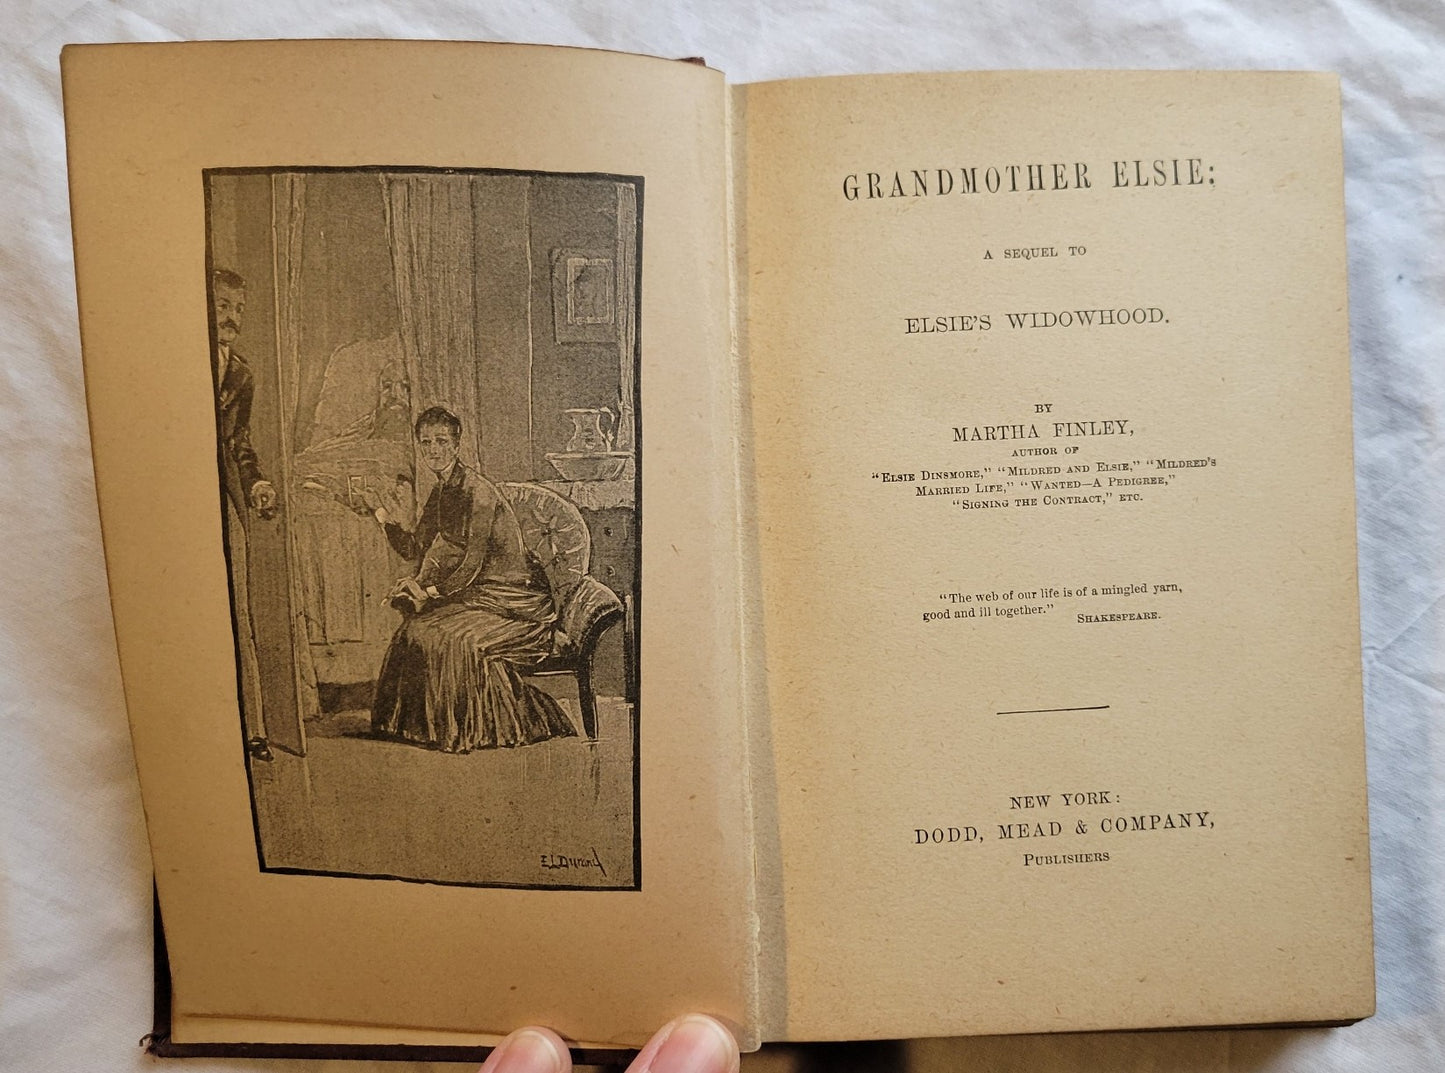 Antique book for sale "Grandmother Elsie" by Martha Finley, published by Dodd, Mead, & Company, copyright 1882.  This is the 8th book in the Elsie Dinsmore series.  View of inside title page.